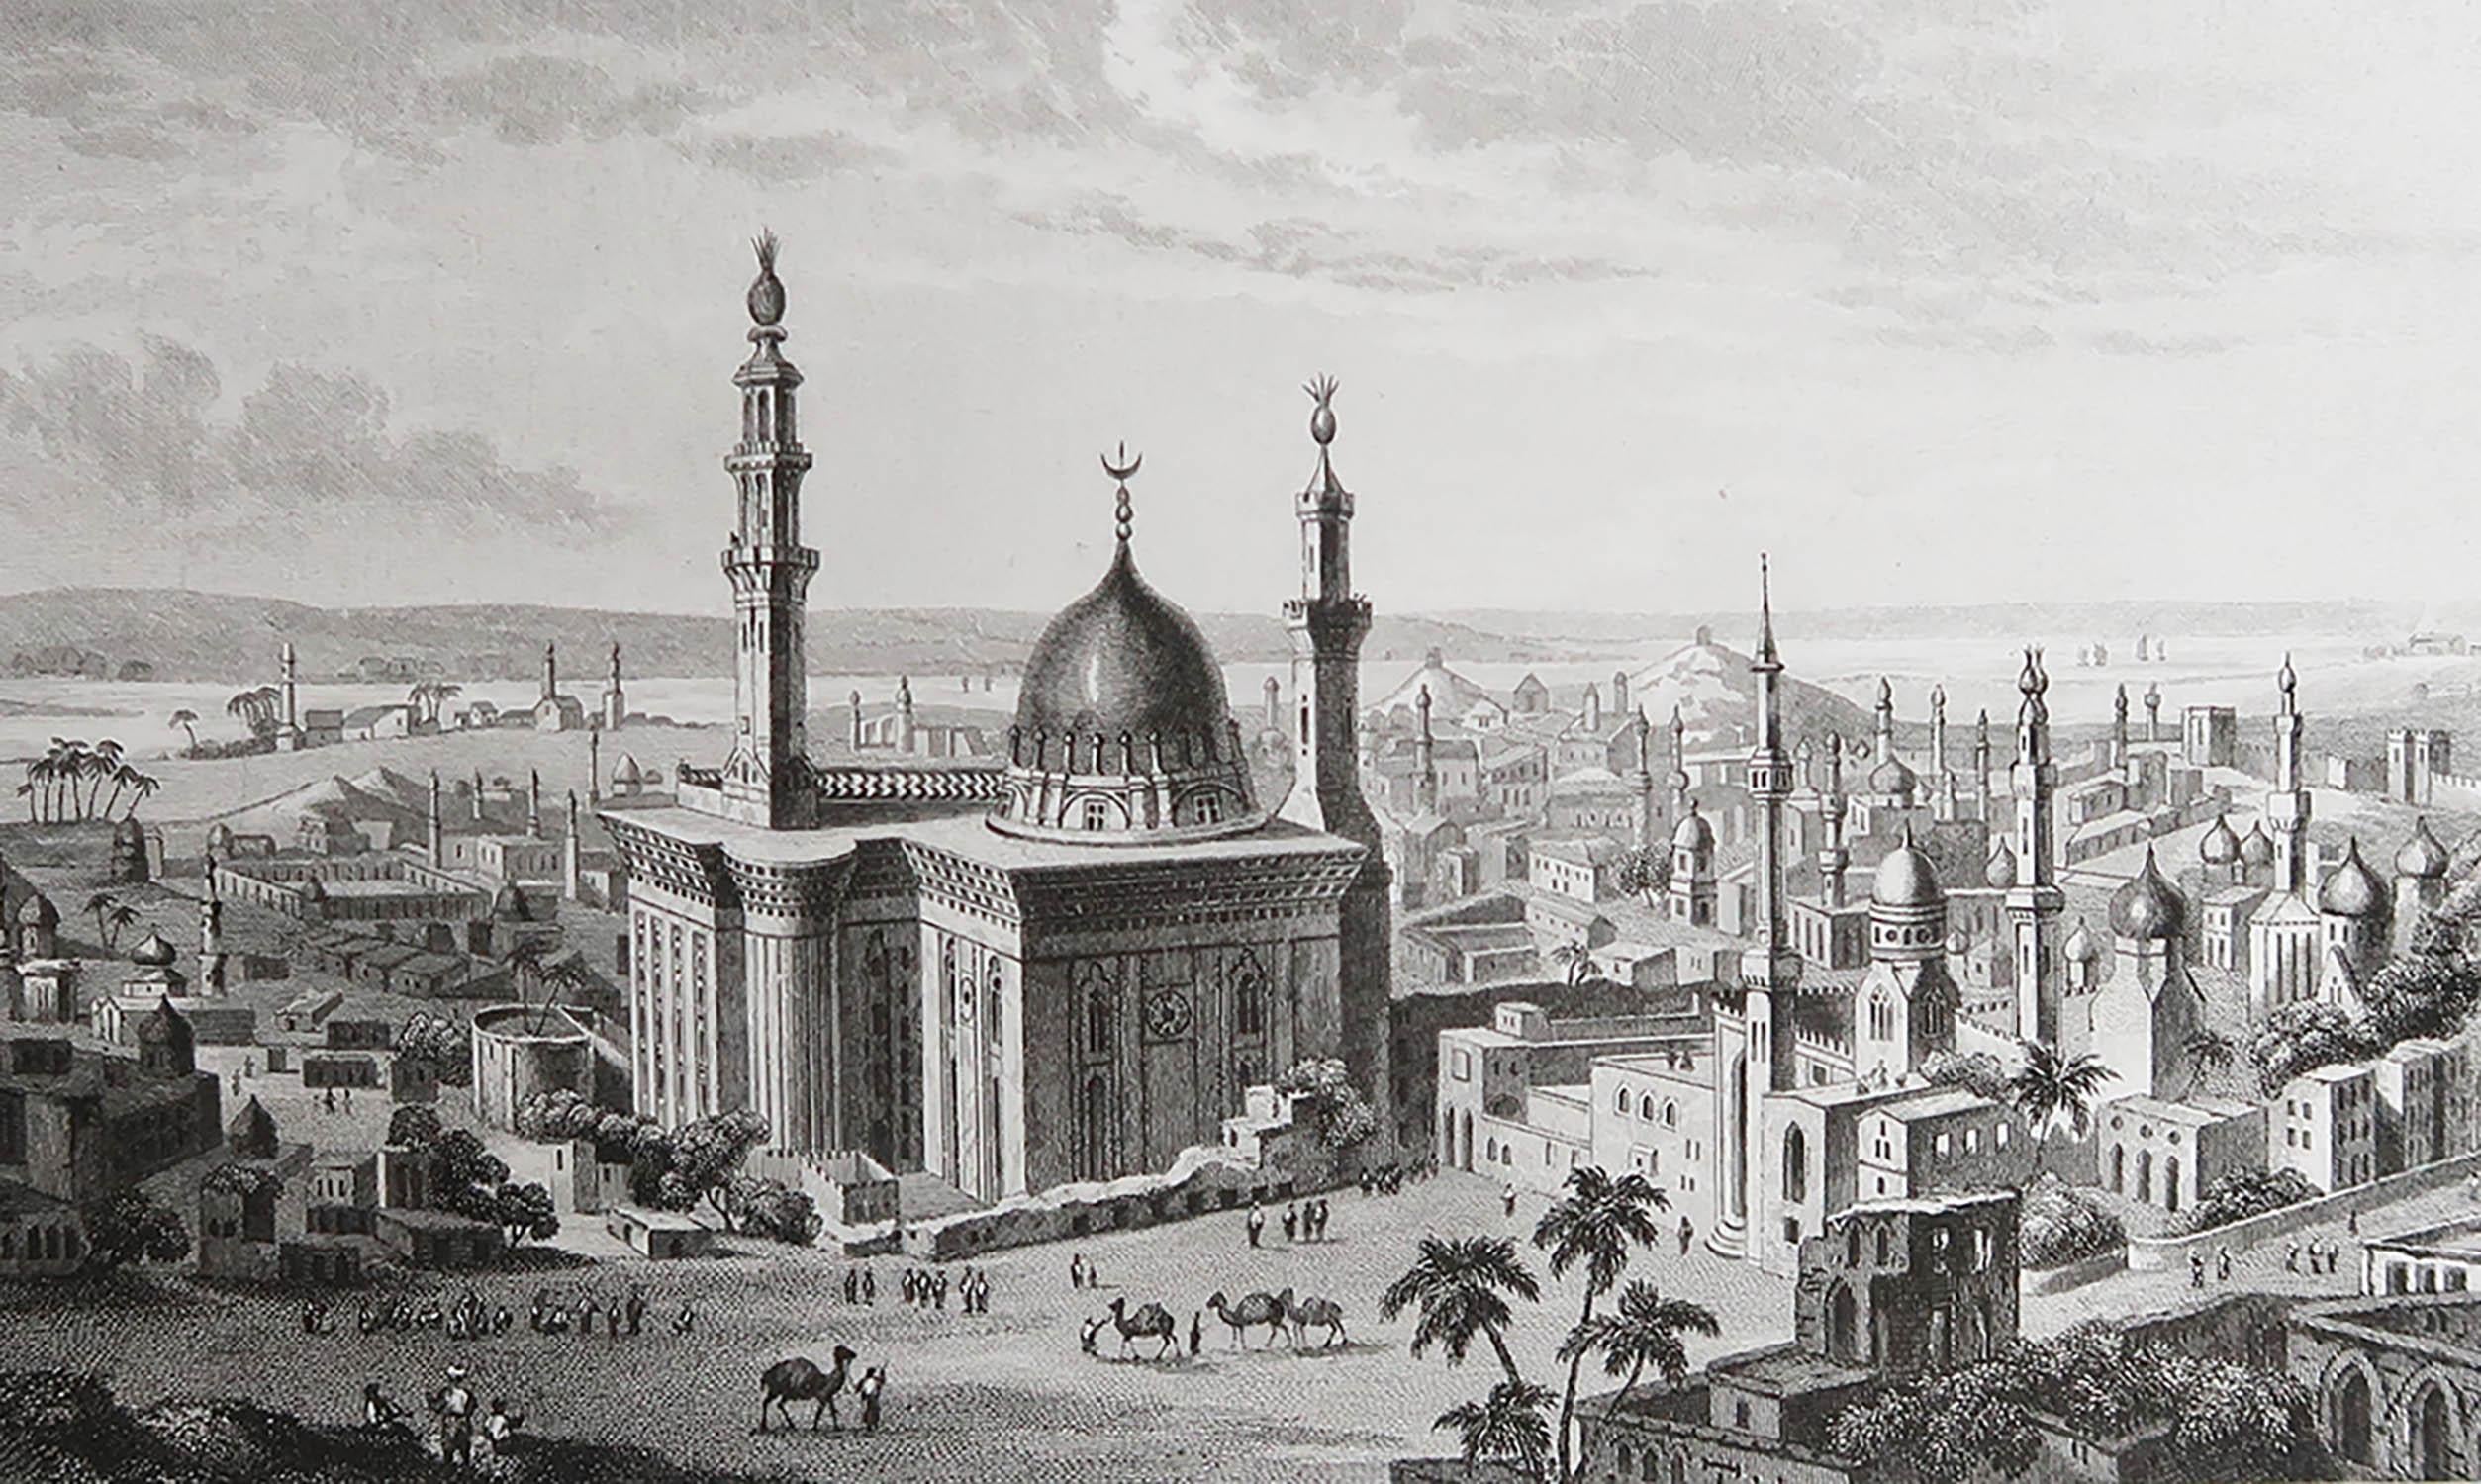 Wonderful image of Cairo

Fine steel engraving 

Published by Thomas Kelly, London, circa 1840

Unframed.

